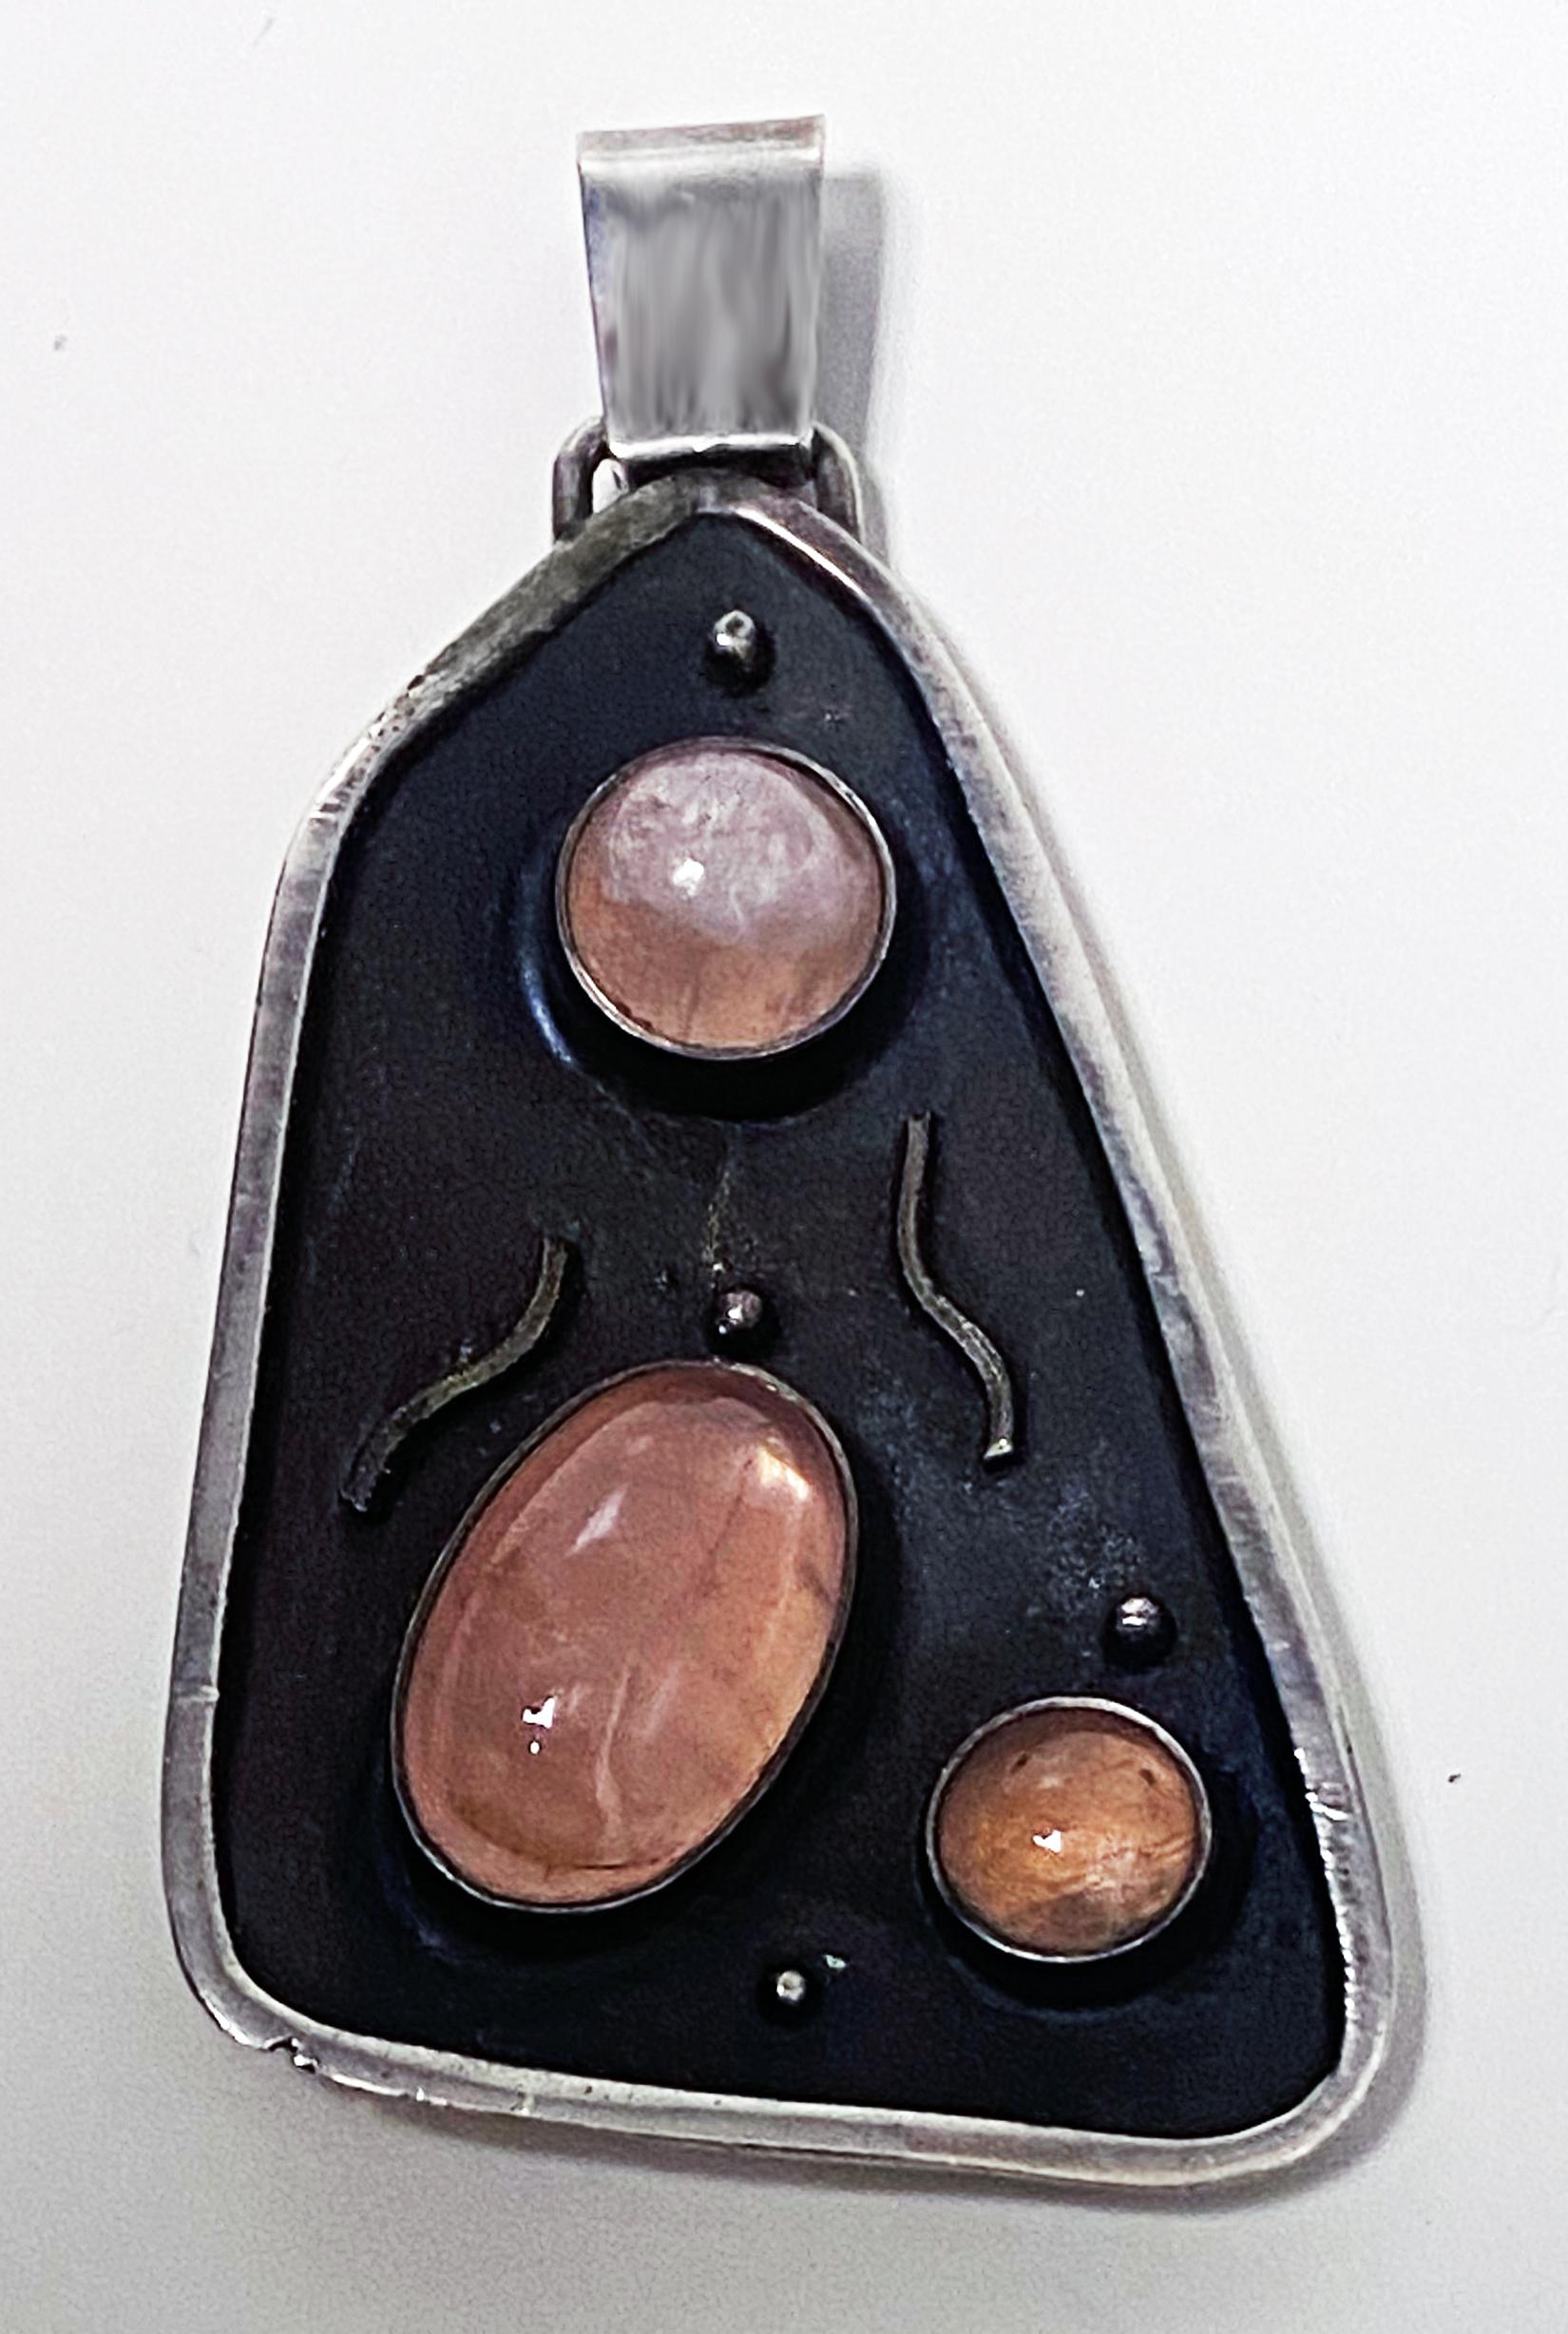 Georg Kramer modernist Silver and Rose Quartz Pendant Germany C. 1930. Asymmetrical form, handmade oxidised and polished silver bezel set with oval and round cabochon rose tint quartz. Pendant measures approximately 2.25 inches (height) x 1.25 width